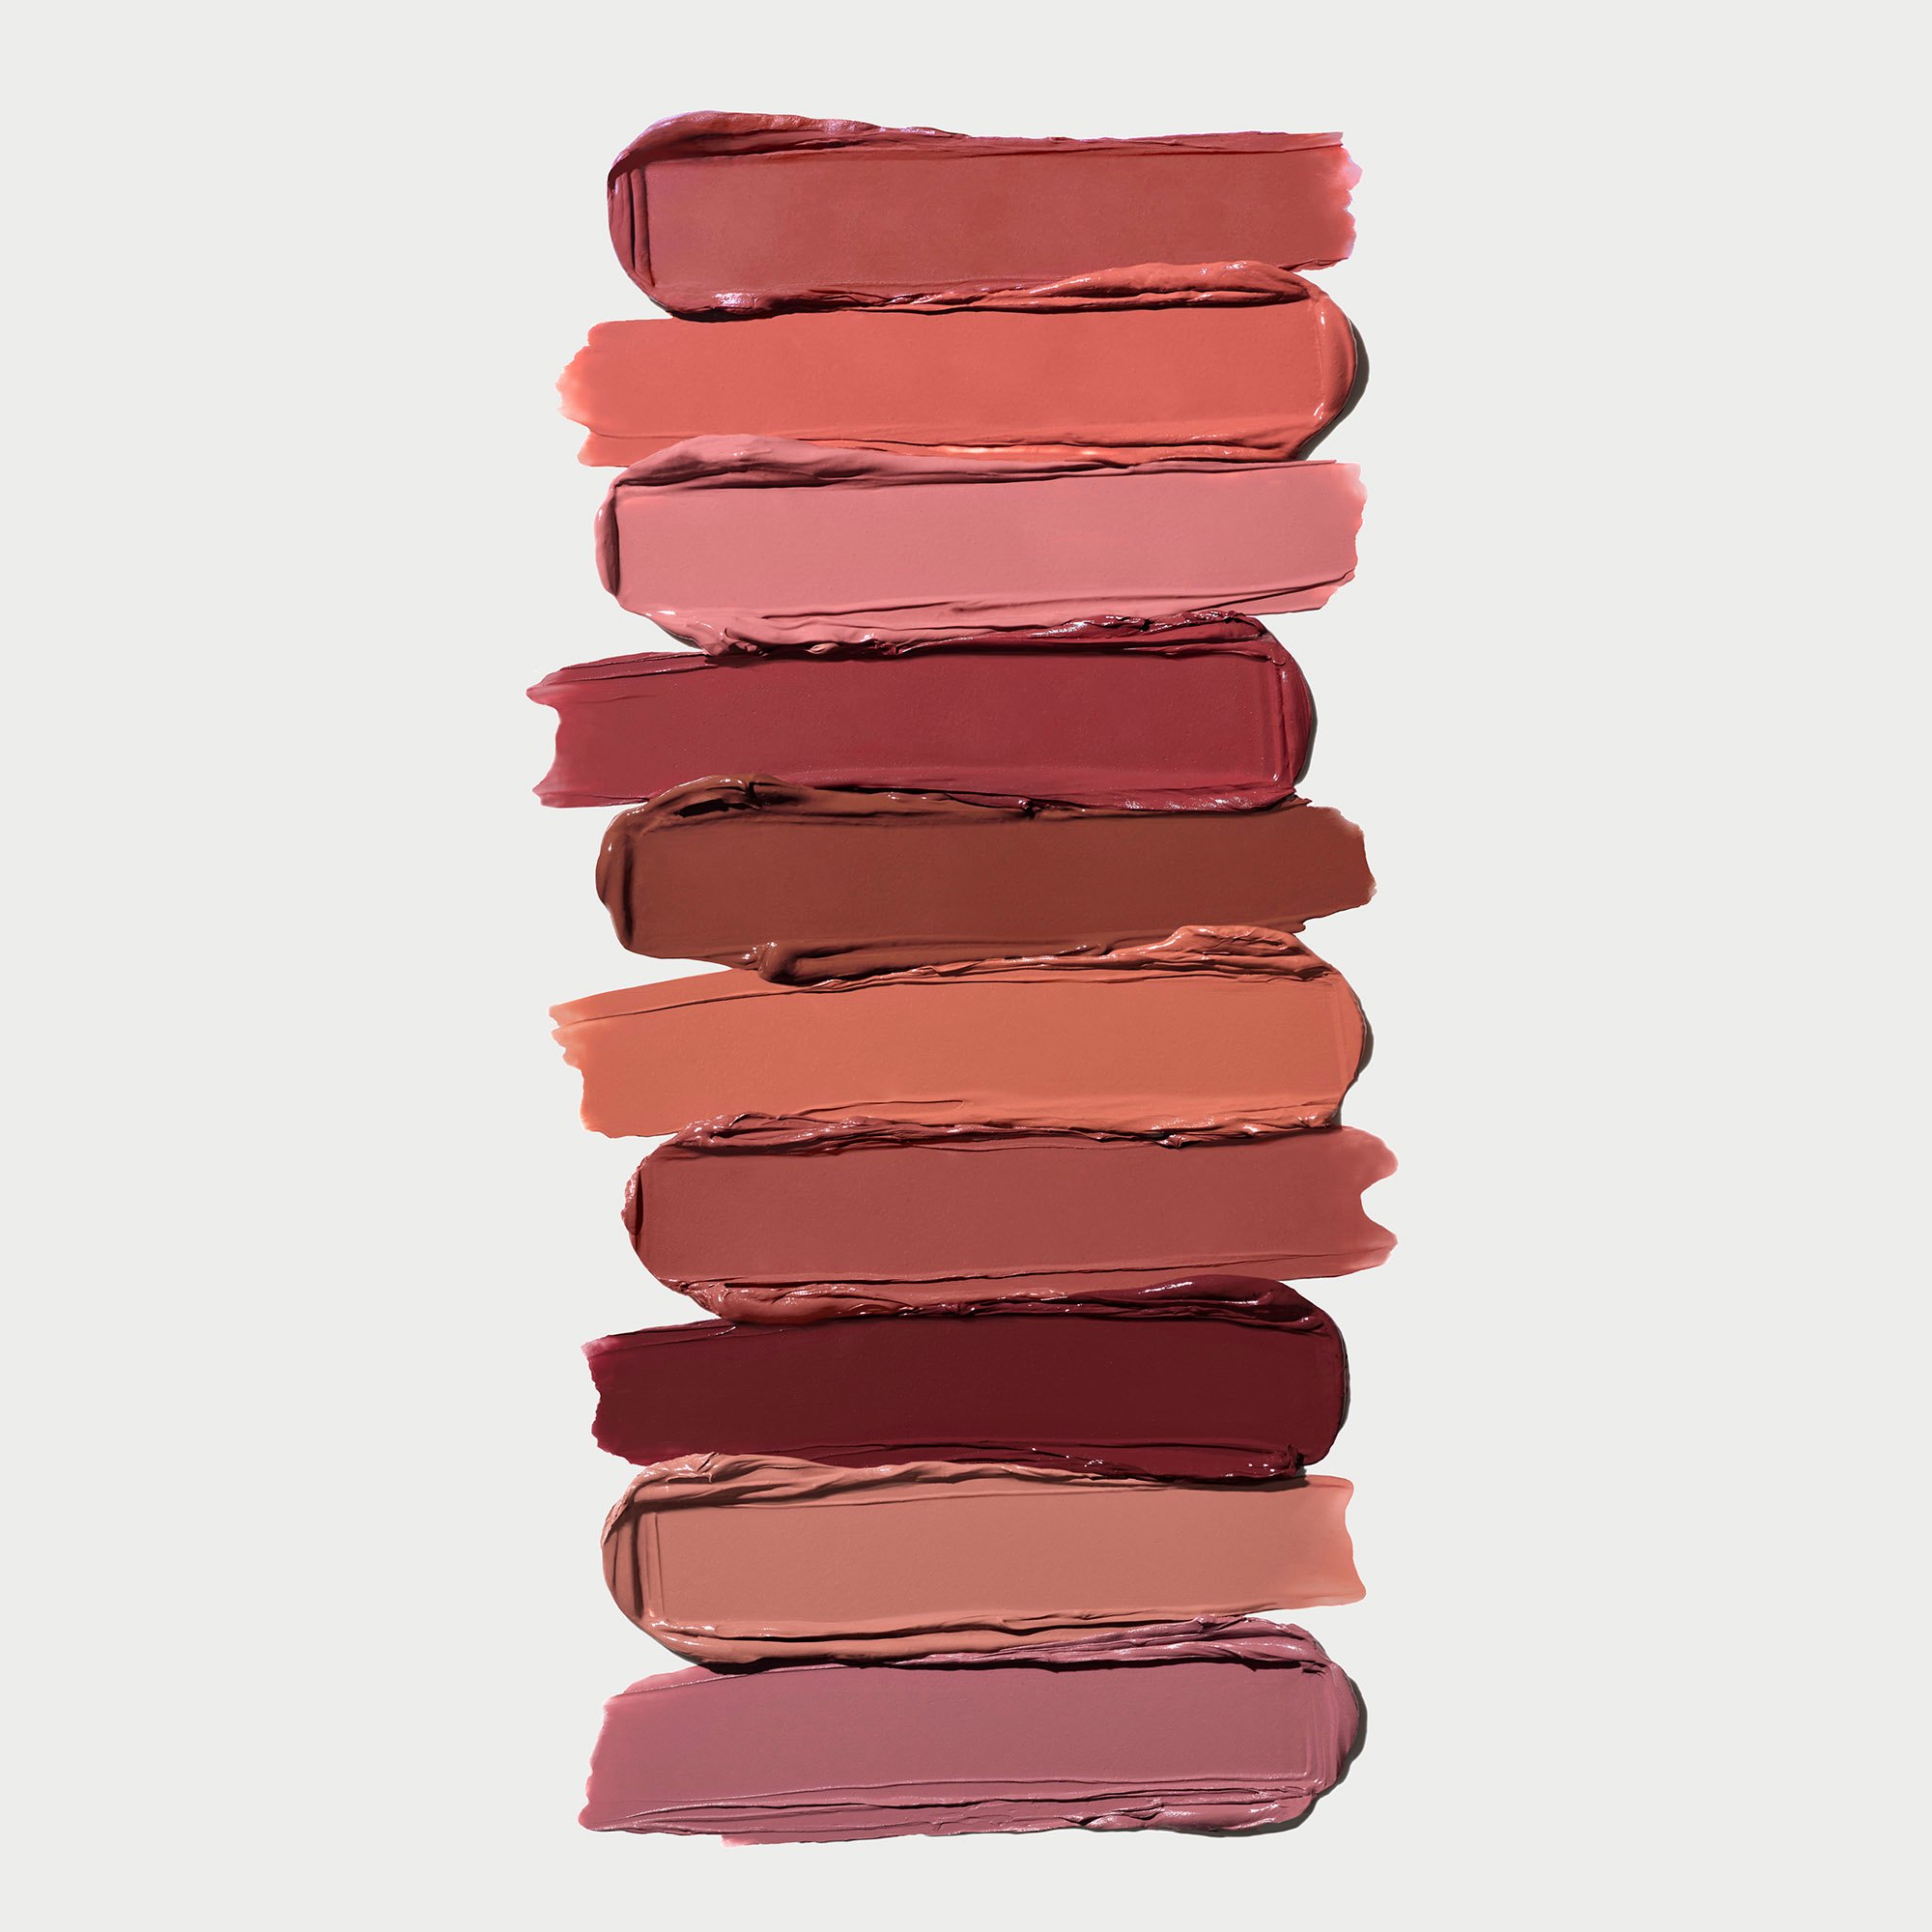 Image of product texture swatches in all 10 shades of the Satin Lip Color Rich Refillable Lipstick